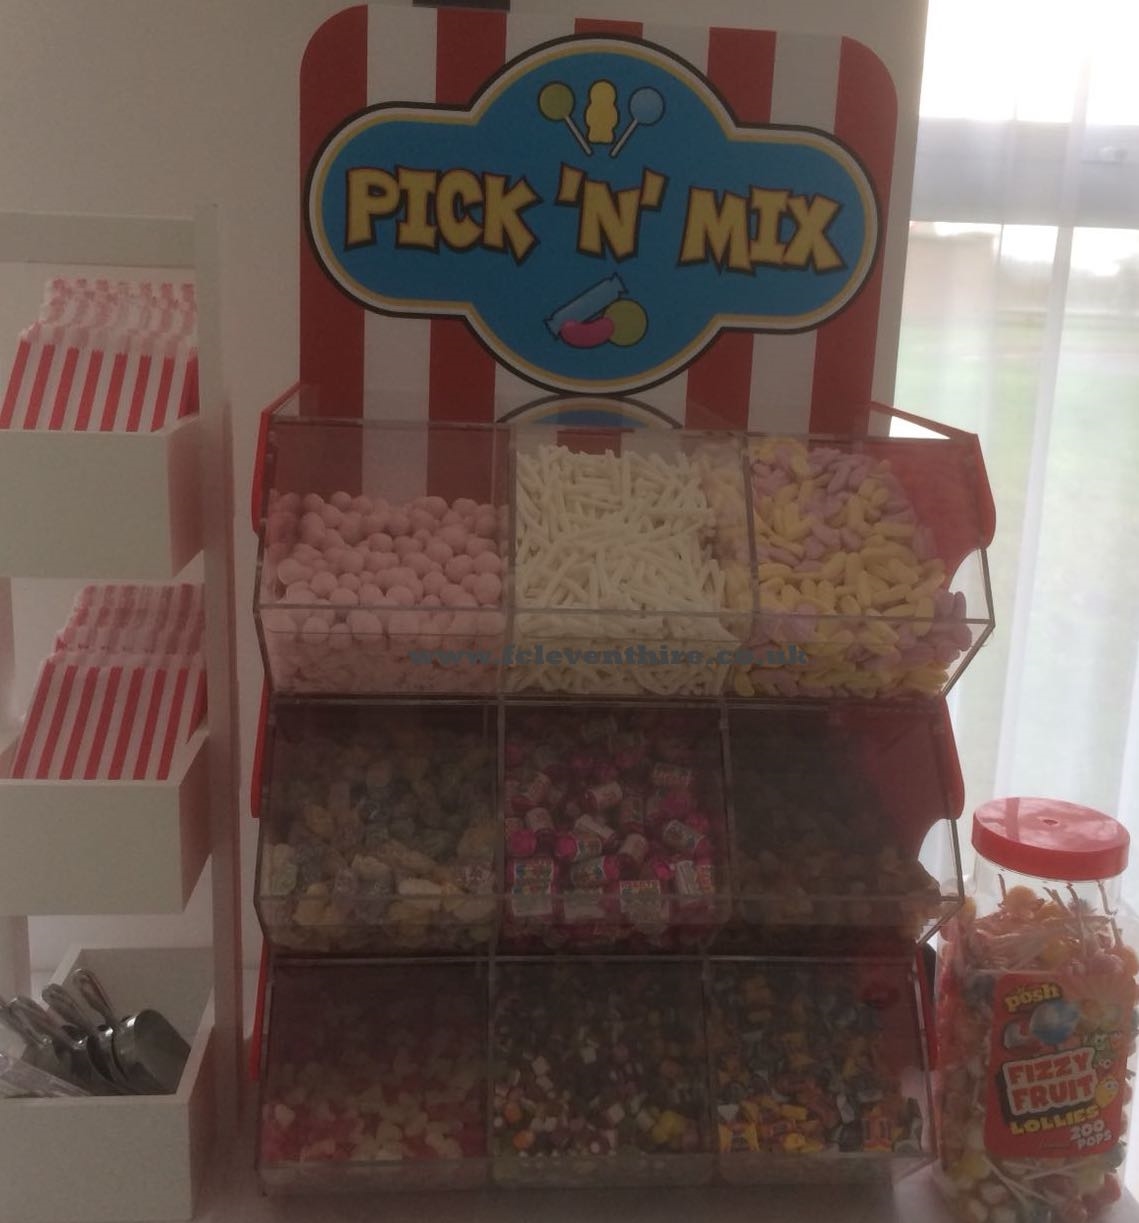 Branded Pick n Mix hire